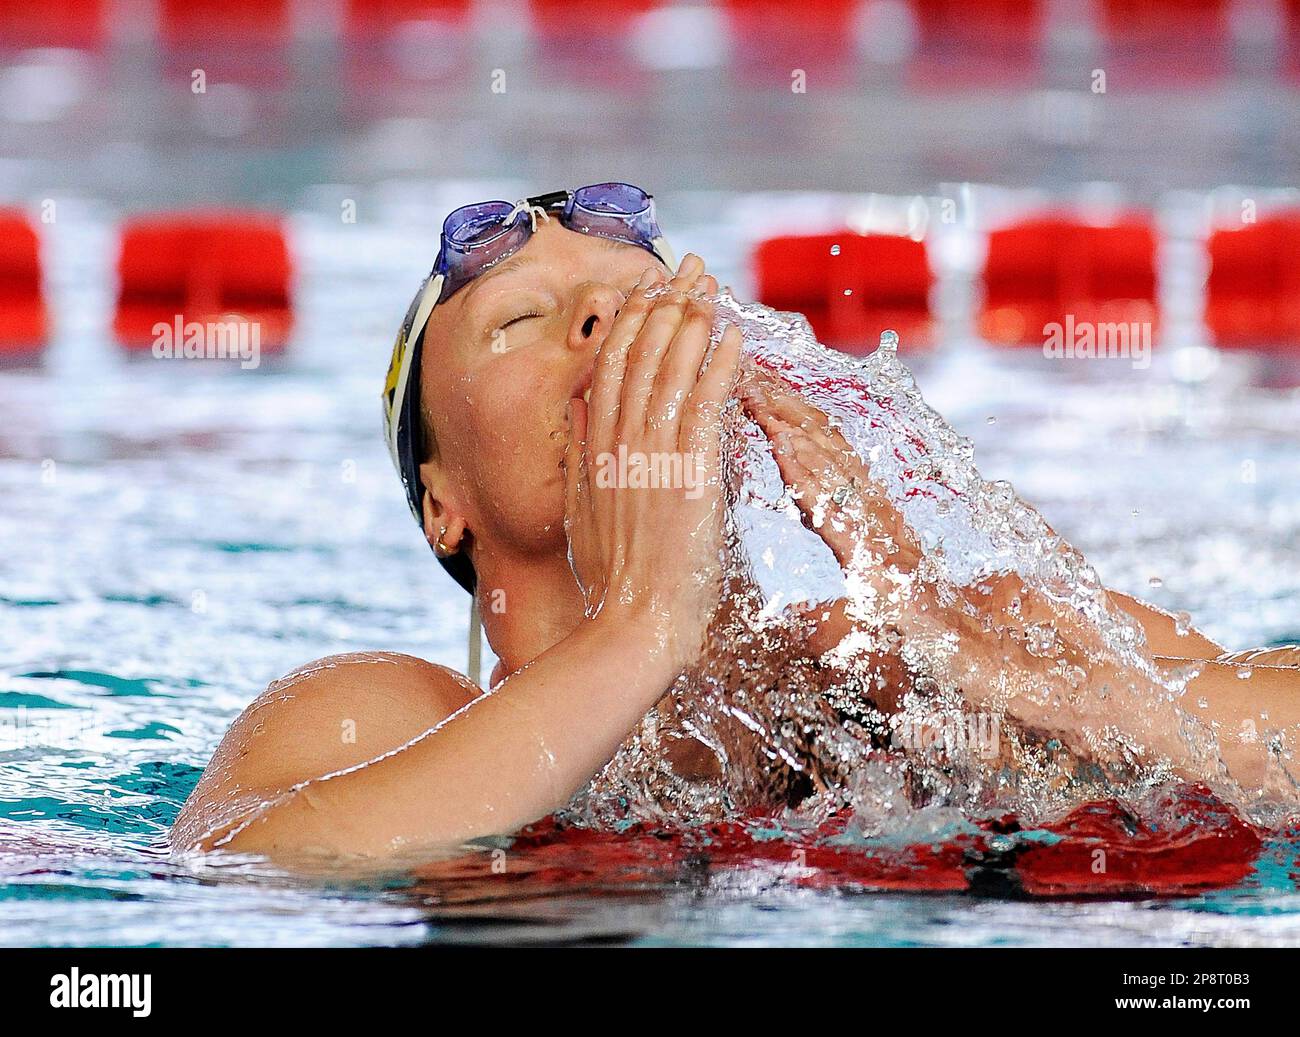 Olympic champion Federica Pellegrini reacts after lowering her world record  in the 200-meter freestyle at an Italian swim meet in Riccione, Italy,  Sunday, March 8, 2009. Pellegrini clocked 1 minute, 54.47 seconds,